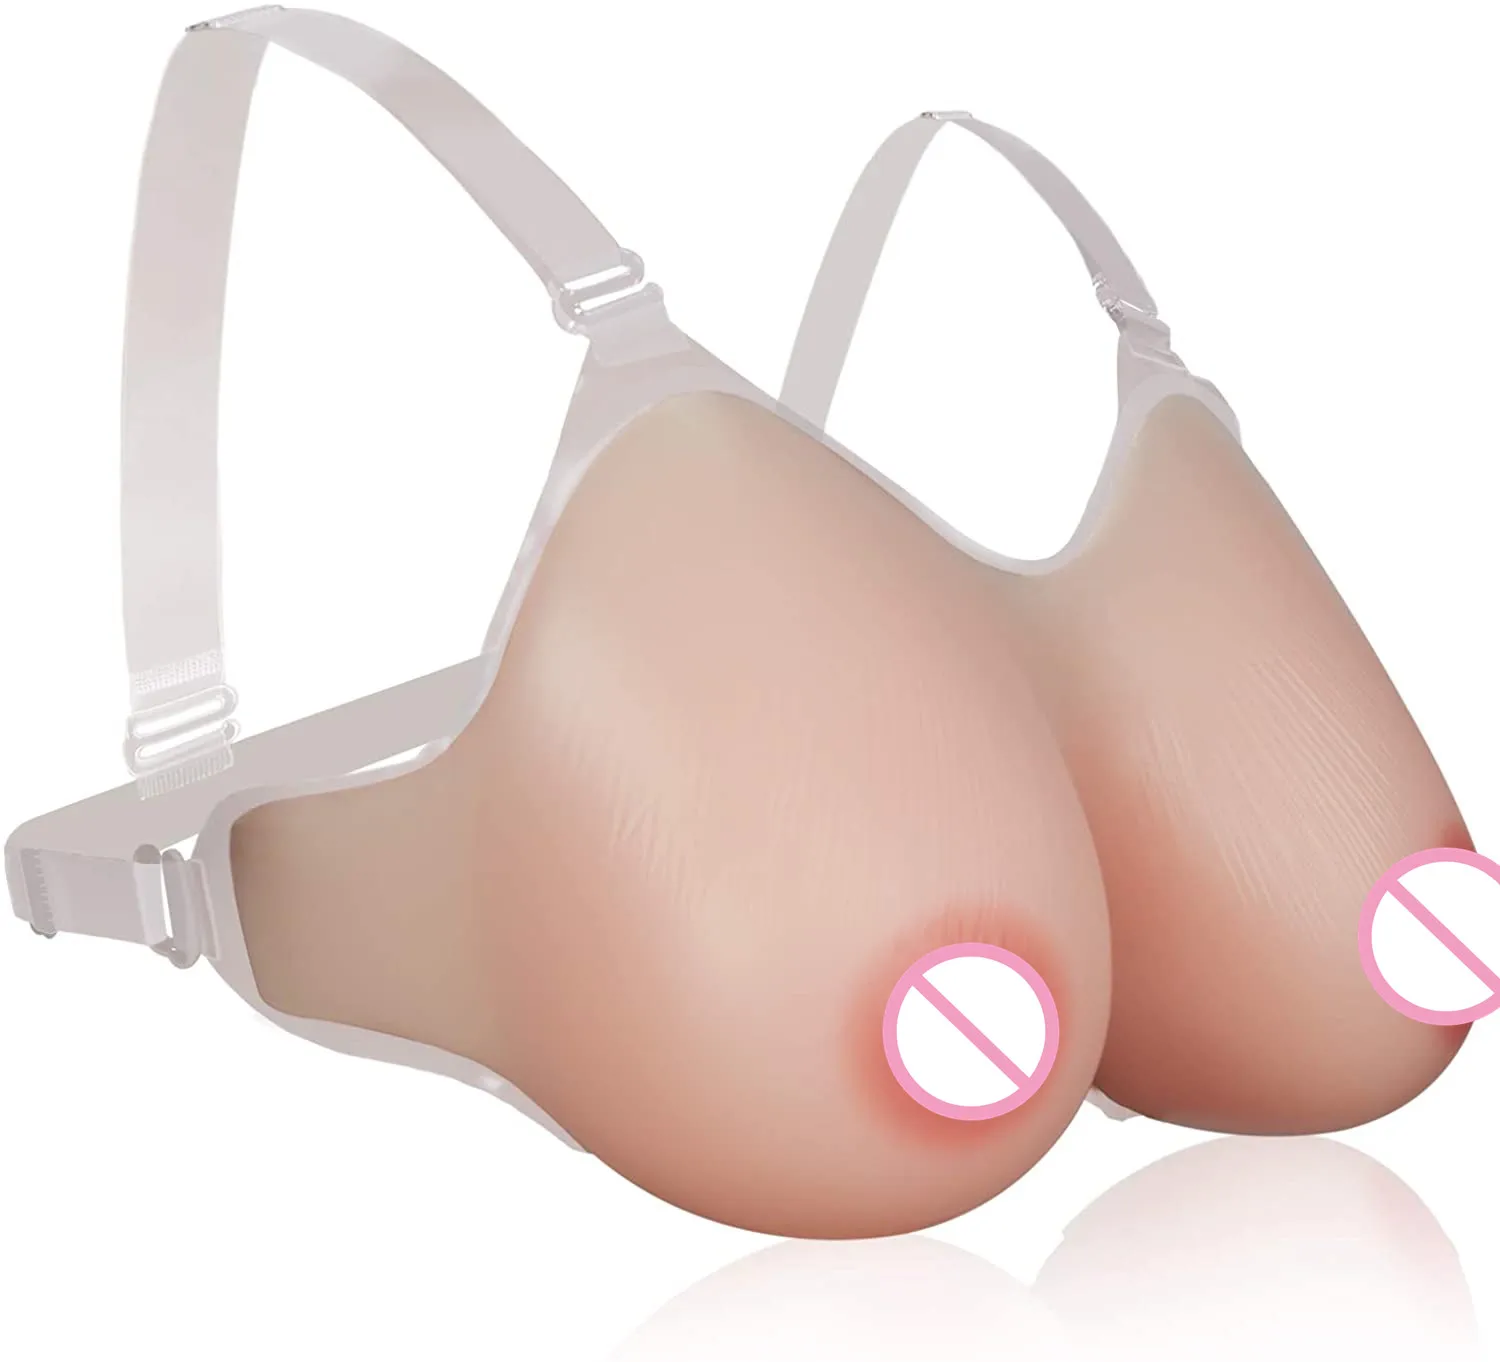 Crossdress Silicone Tits - Strap On Silicone Breast Forms Fake Boobs Tits Ivory White/nude/suntan For  Cosplay Sissy Crossdresser Drag Queen Shemale Disfraz - Breast Protheses -  AliExpress